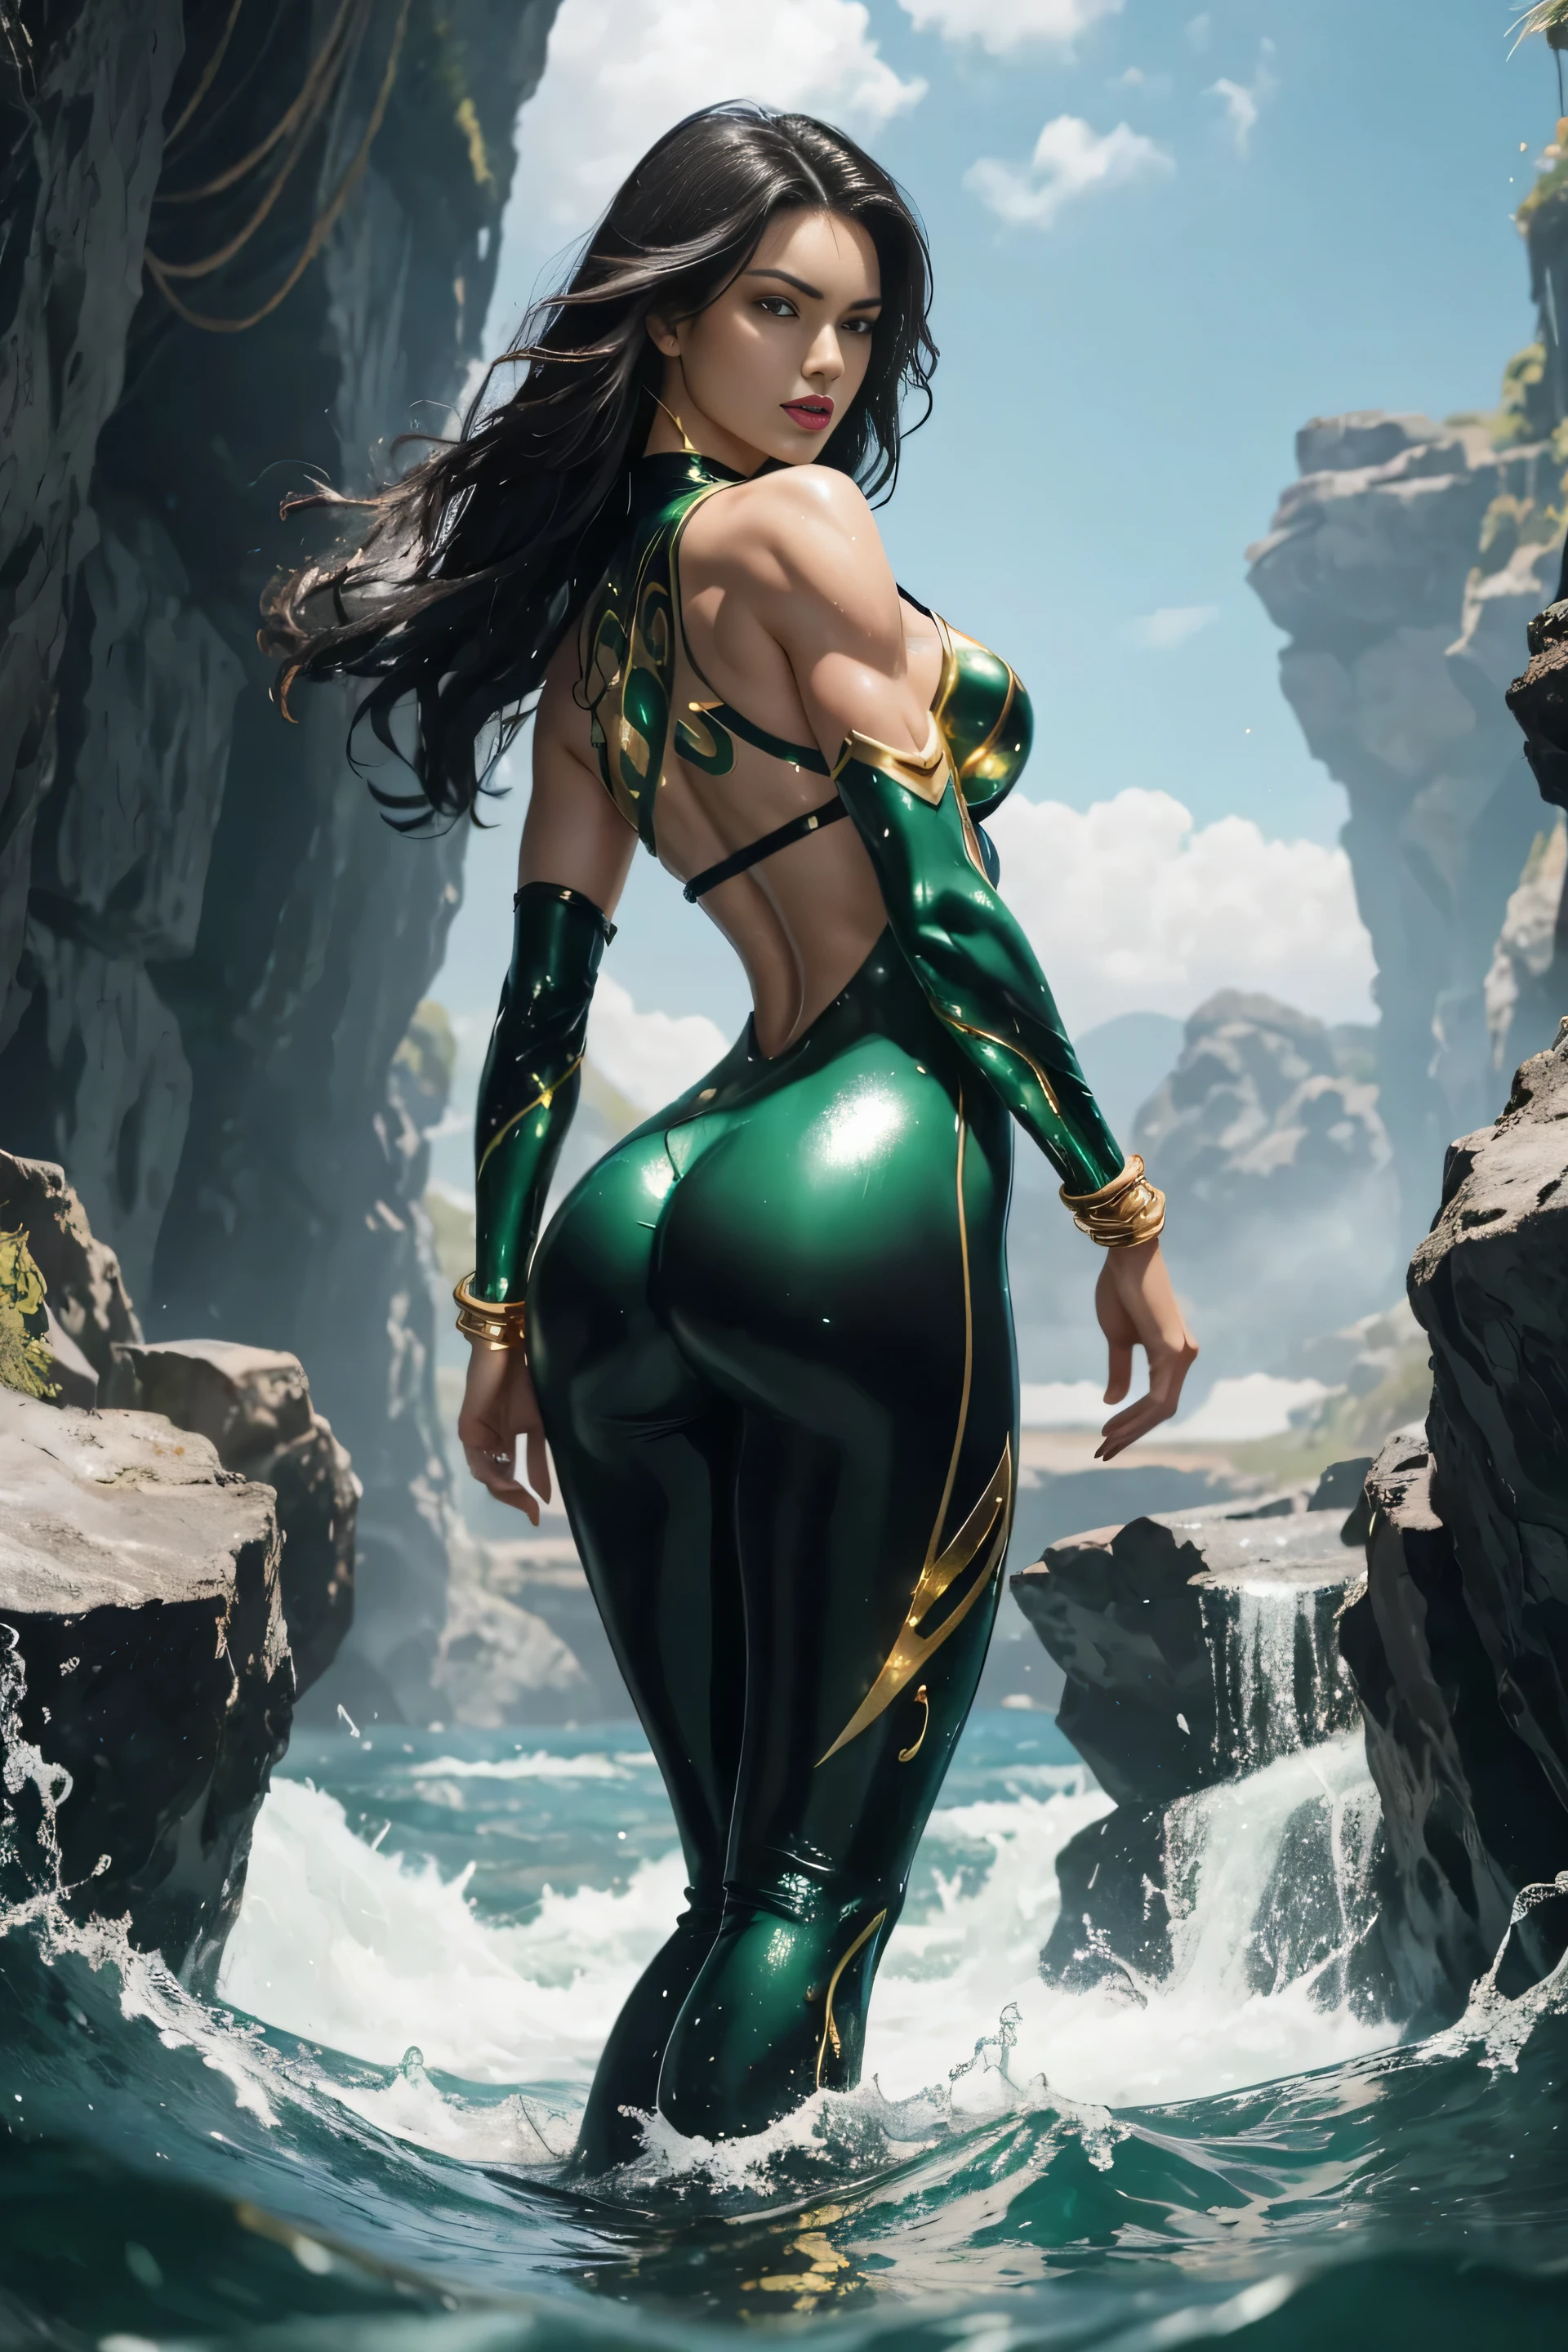 Full body shot seen from behind Sexy 14 years old, superheroine Aquagirl long shaggy wet black hair falling on her long black shoulders, glowing green, eyes red lips muscular body large breast wears a transparent decorated with green scales shiny elastic body-fitting wetsuit, plunging sleeveless top gold shoulder pads gold bracelets revealing abs midriff a Z symbol on her chest portrait photography by artgerm, in the style of realism, glistening skin, cartooncore, mangacore, natural lighting, Defined full lips. Muscular fitness feminine body standing in the water in the background is a huge terrifying water monster